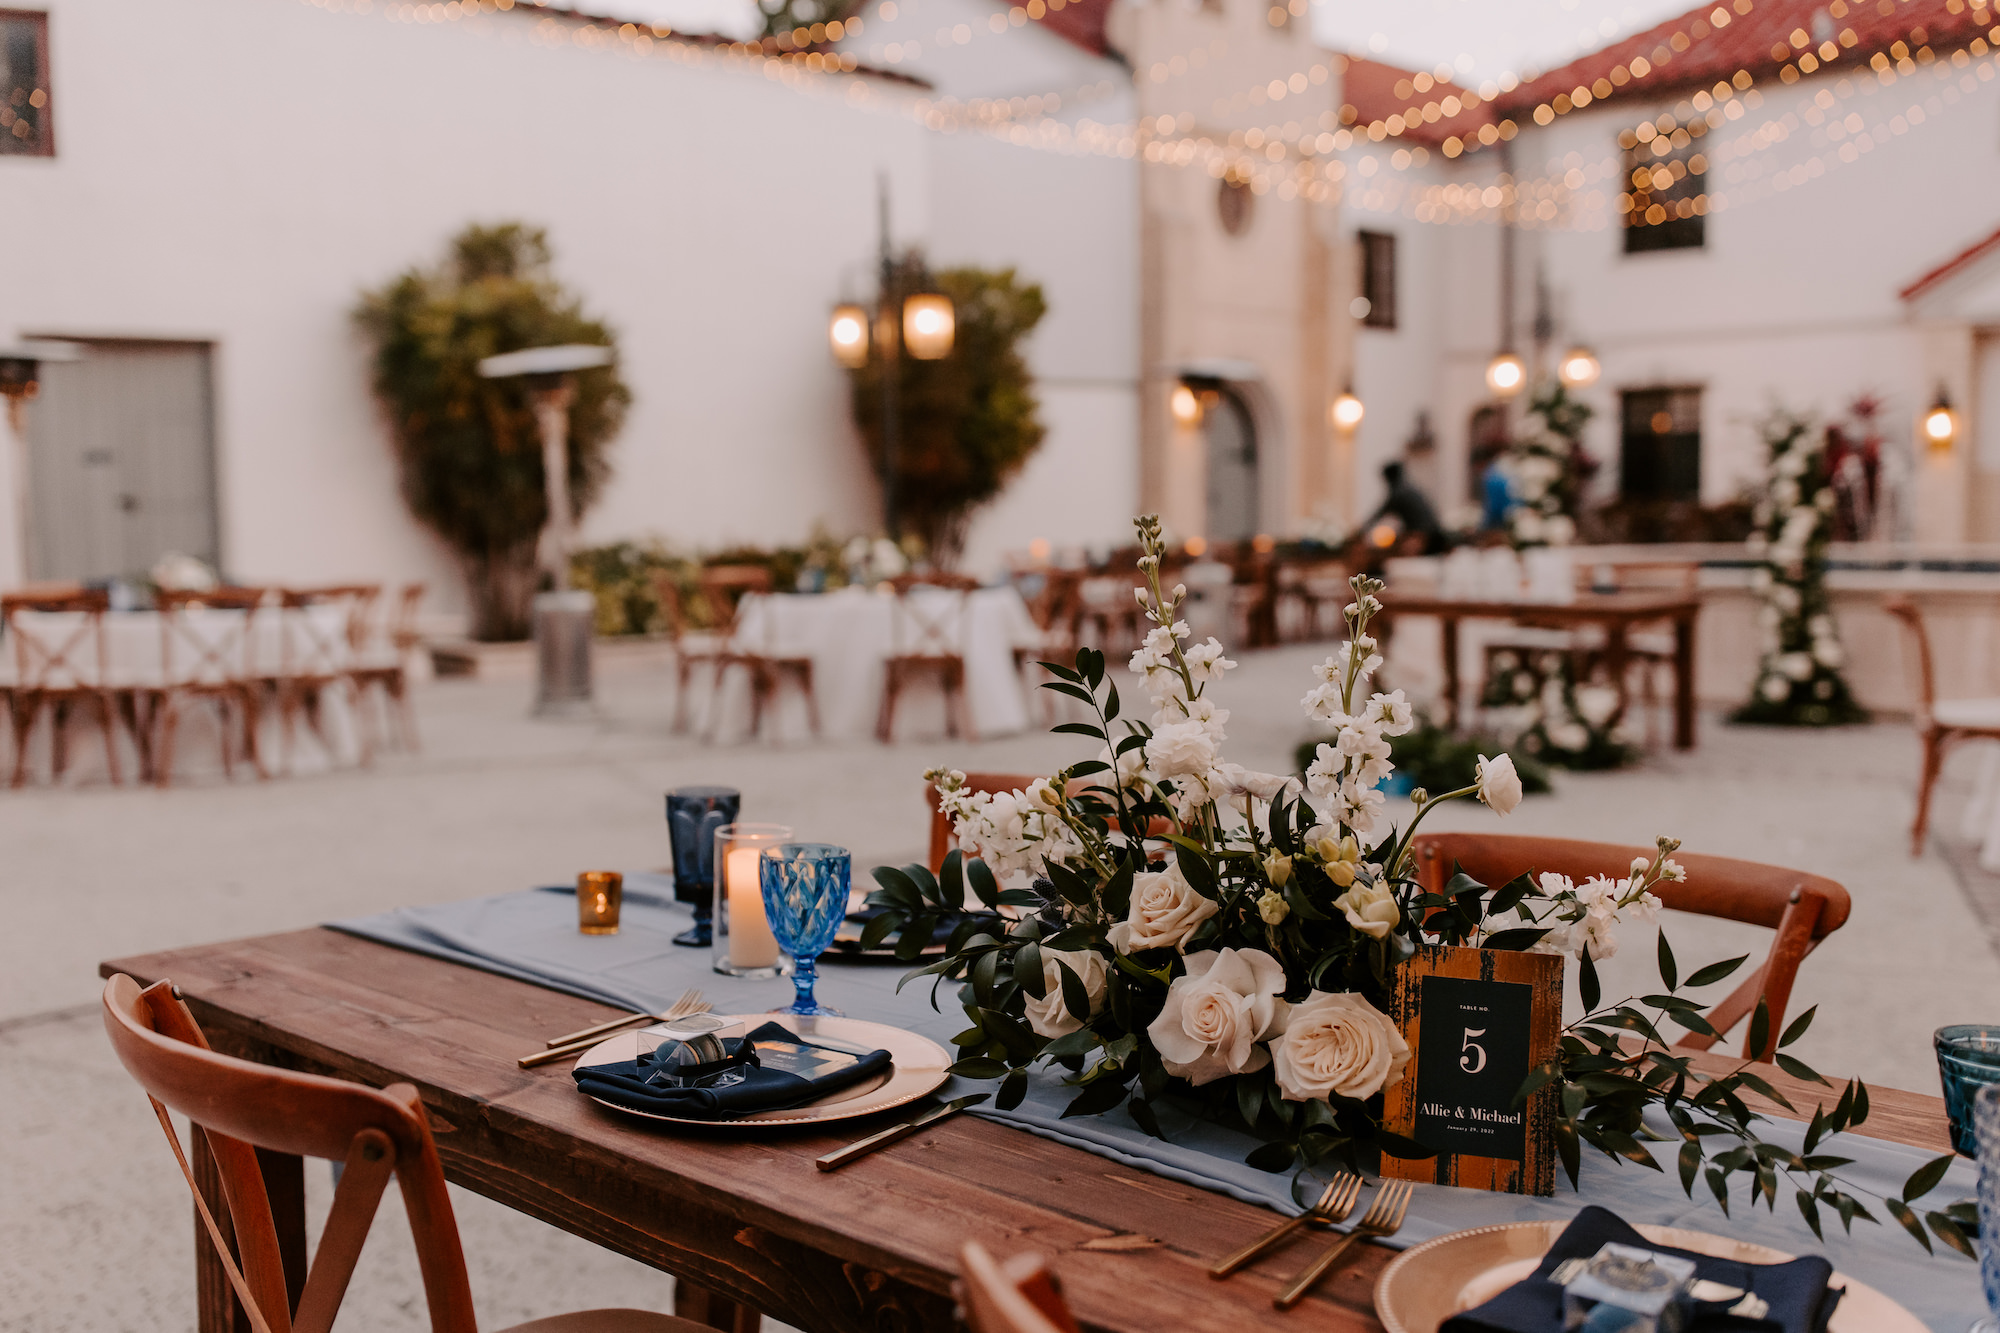 Romantic French Country Outdoor Courtyard Inspiration | White Ranunculus, Dendrobium, Rose, and Ruscus Greenery Centerpiece Ideas | Dusty Blue Wedding Reception Decor Inspiration | Sarasota Wedding Planner Coastal Coordinating